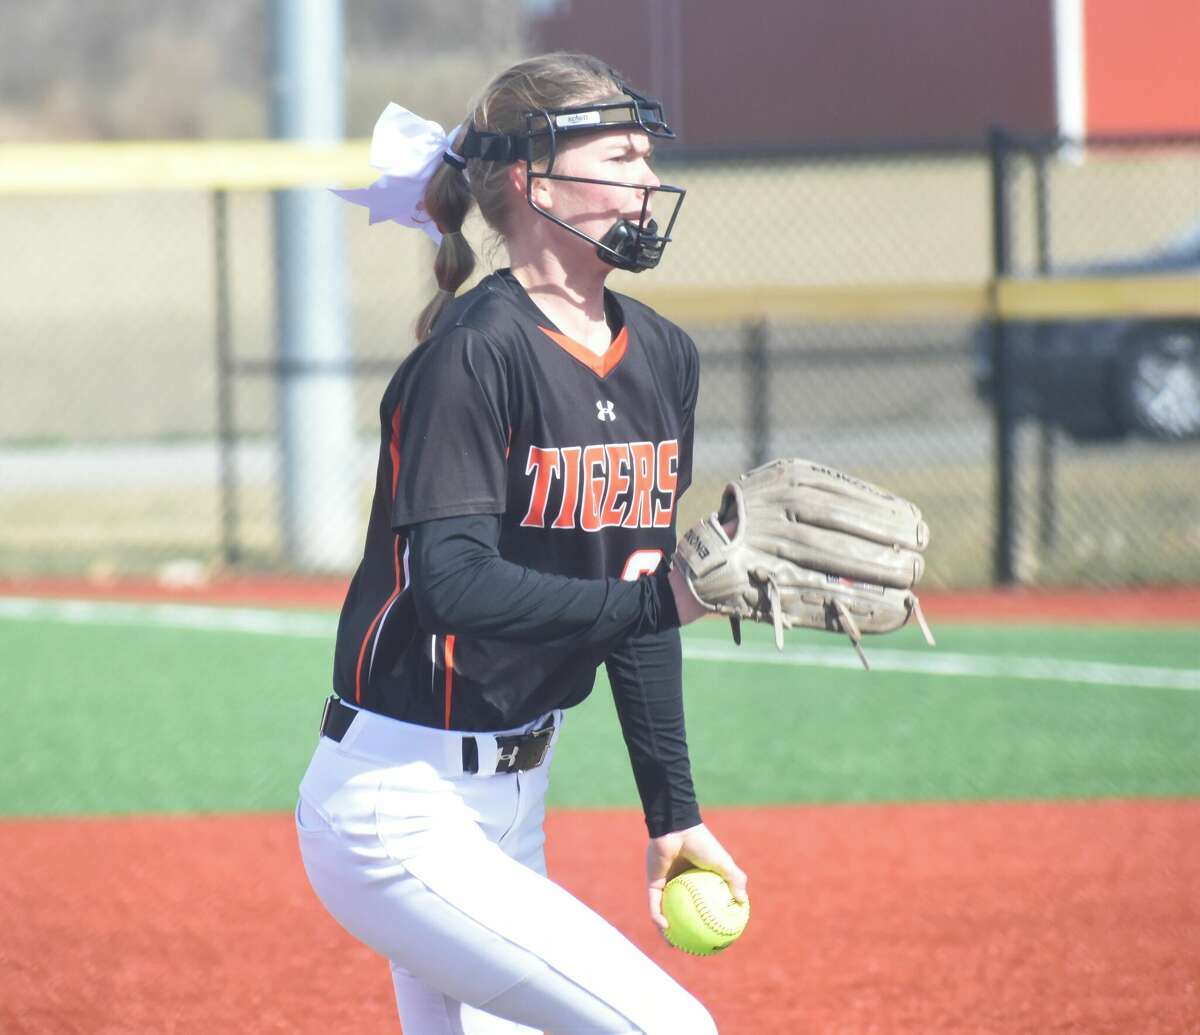 Edwardsville's Ryleigh Owens delivers a pitch to a Breese Central hitter in the first inning on Friday in Edwardsville.